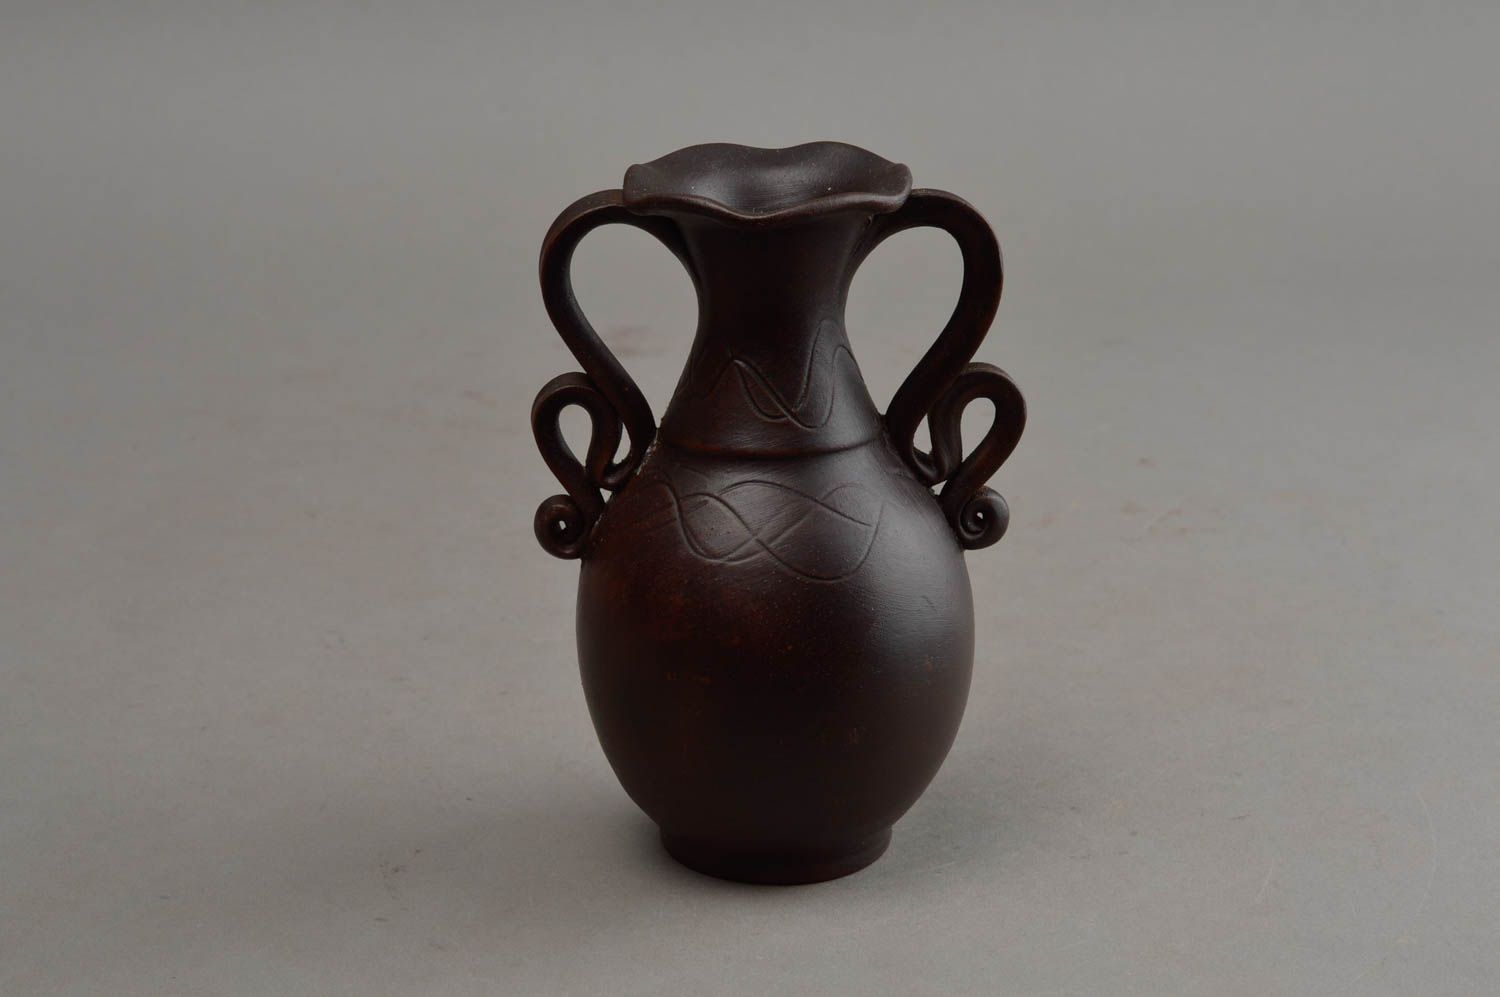 20 oz brown ceramic clay flower vase, wine carafe with two handles 5 inches, 0,5 lb photo 7